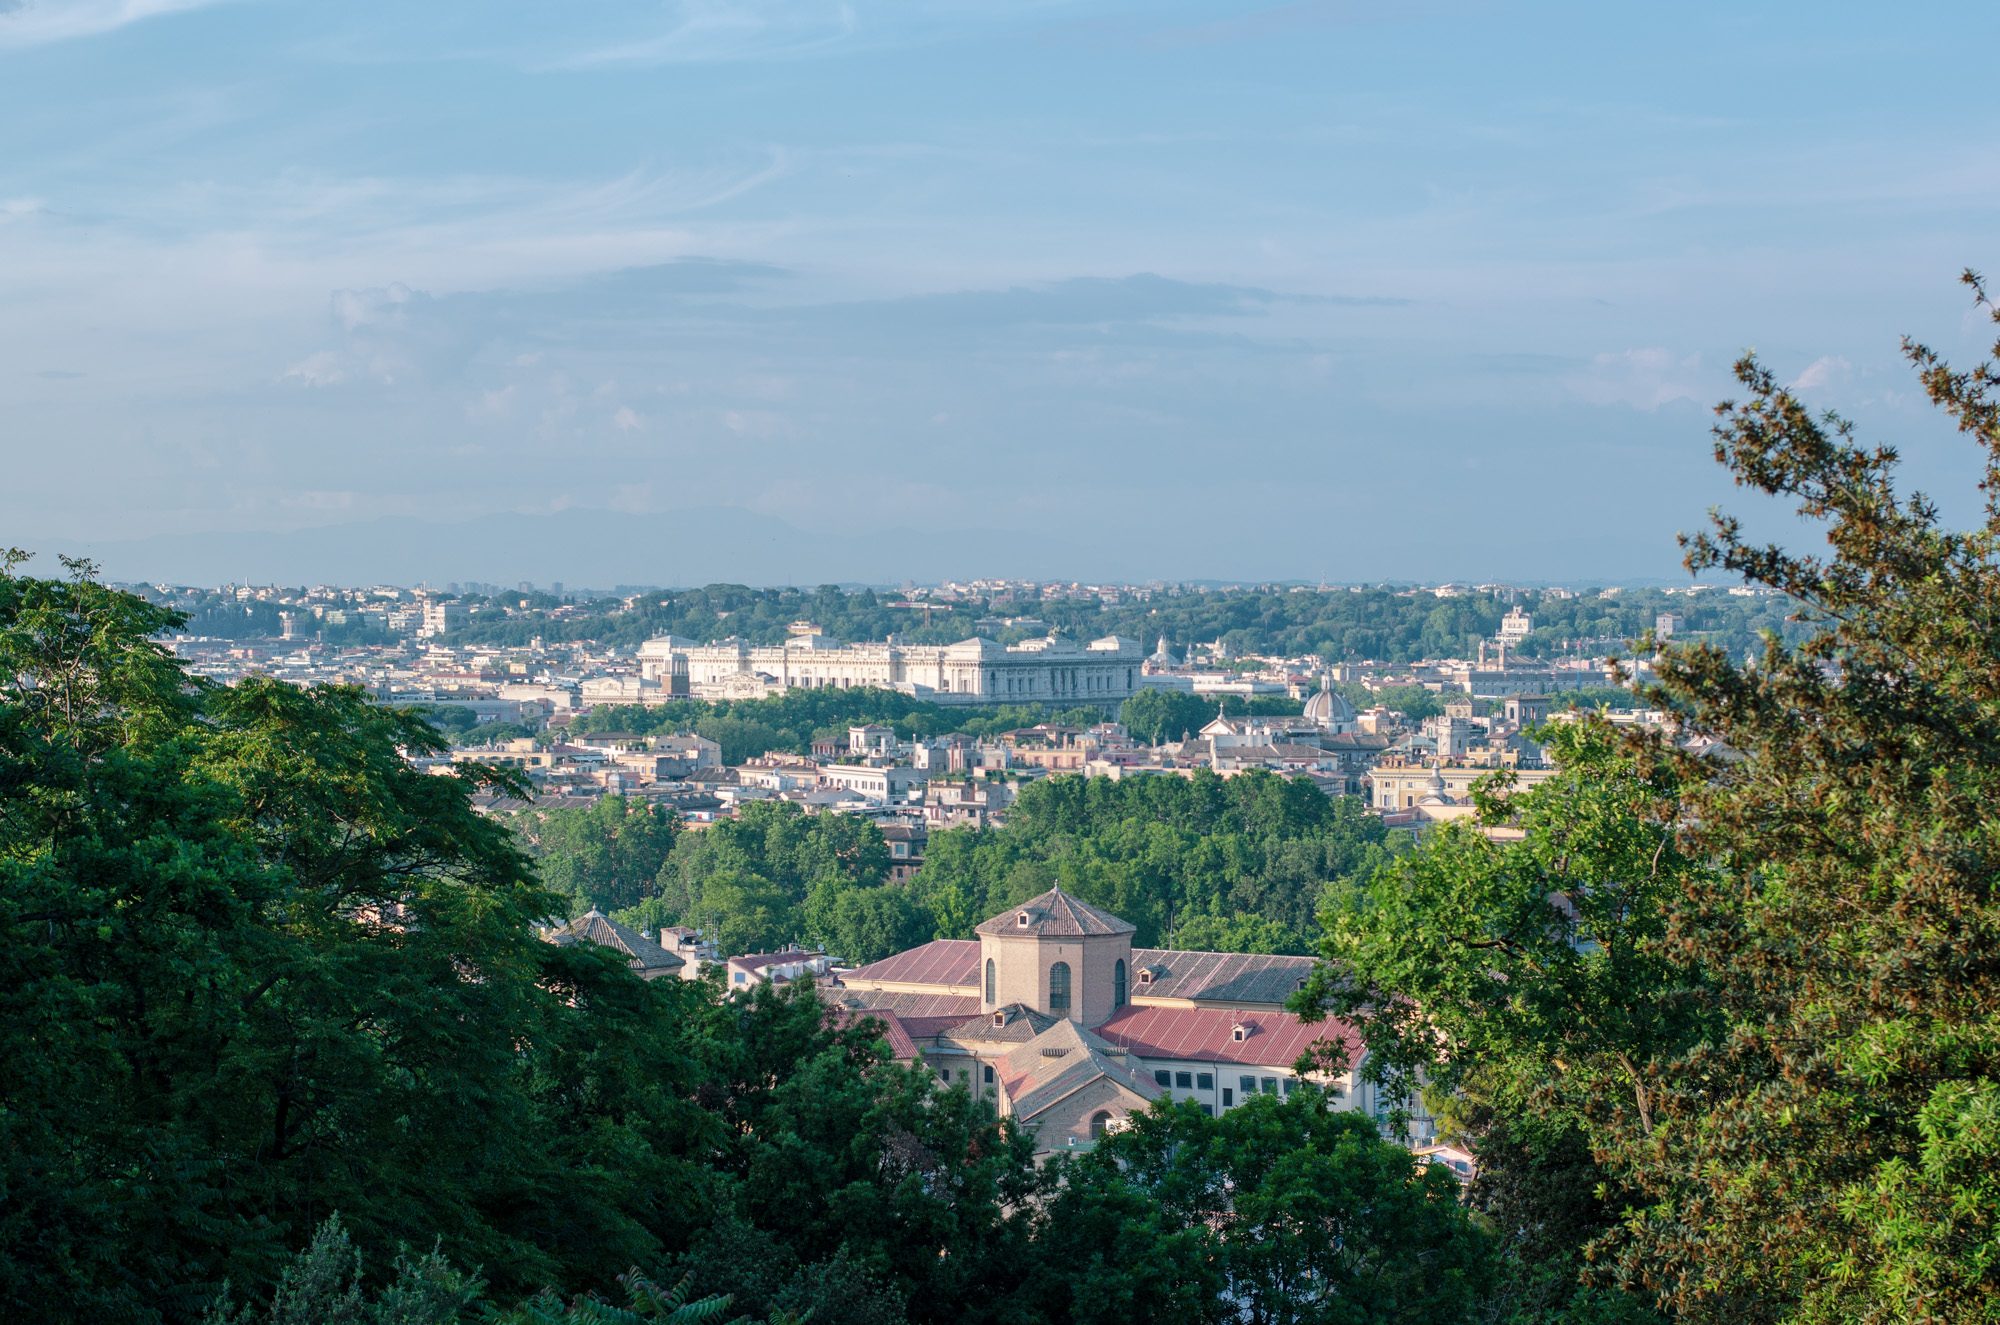 Spectacular views of Rome from Gianicolo Hill